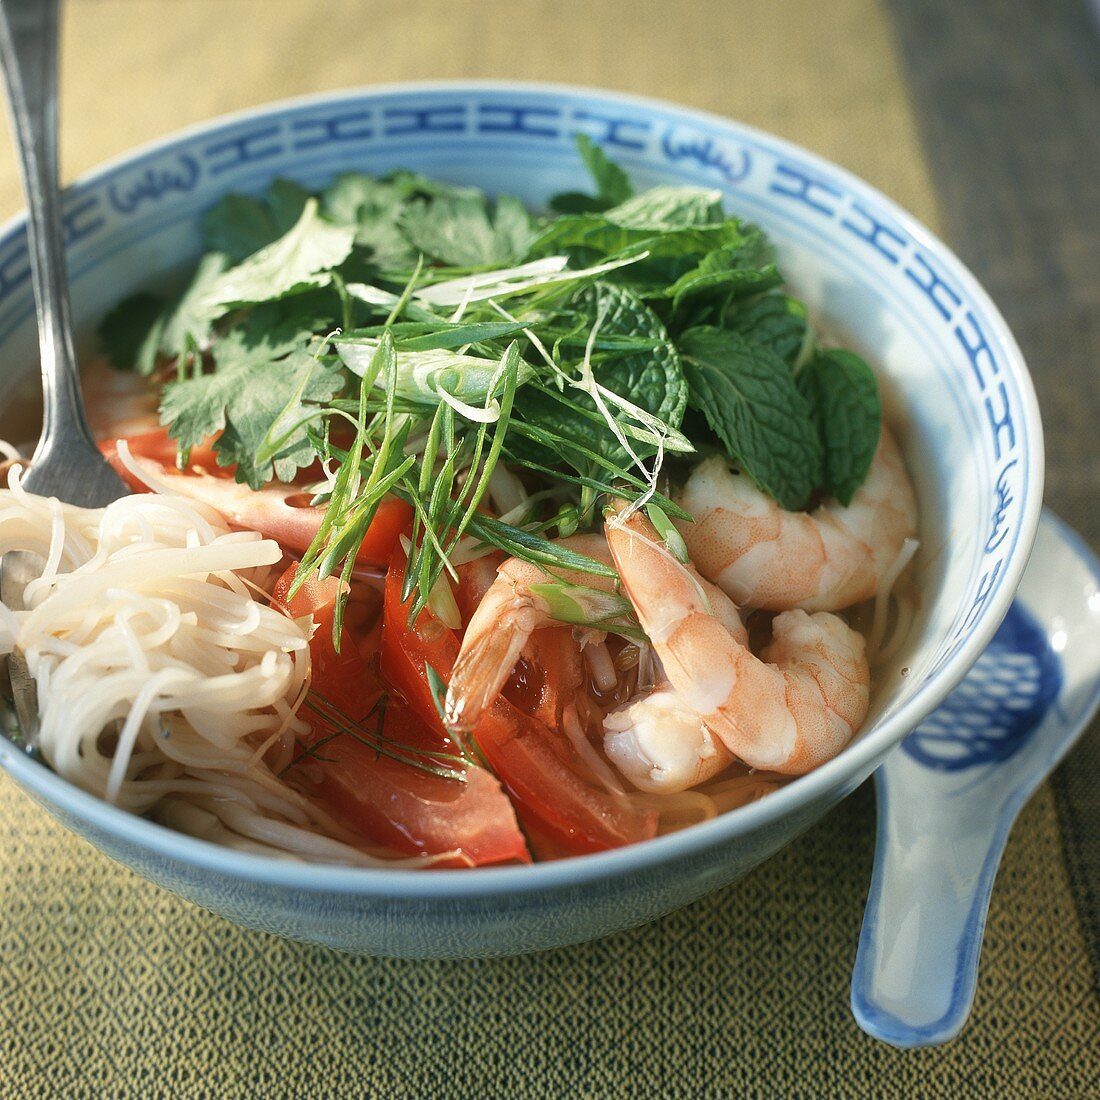 Hot and Sour Soup with Noodles, Shrimp and Tomato